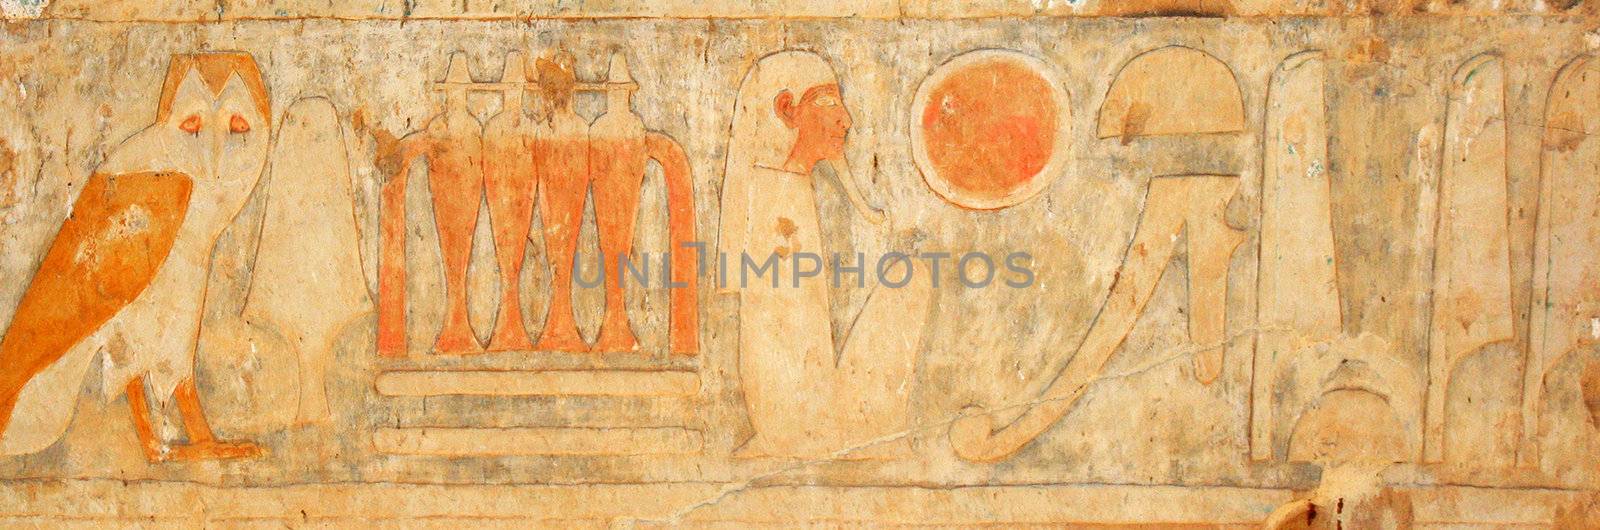 Fragment of Egyptian fresco on the wall of Temple of Hatshepsout